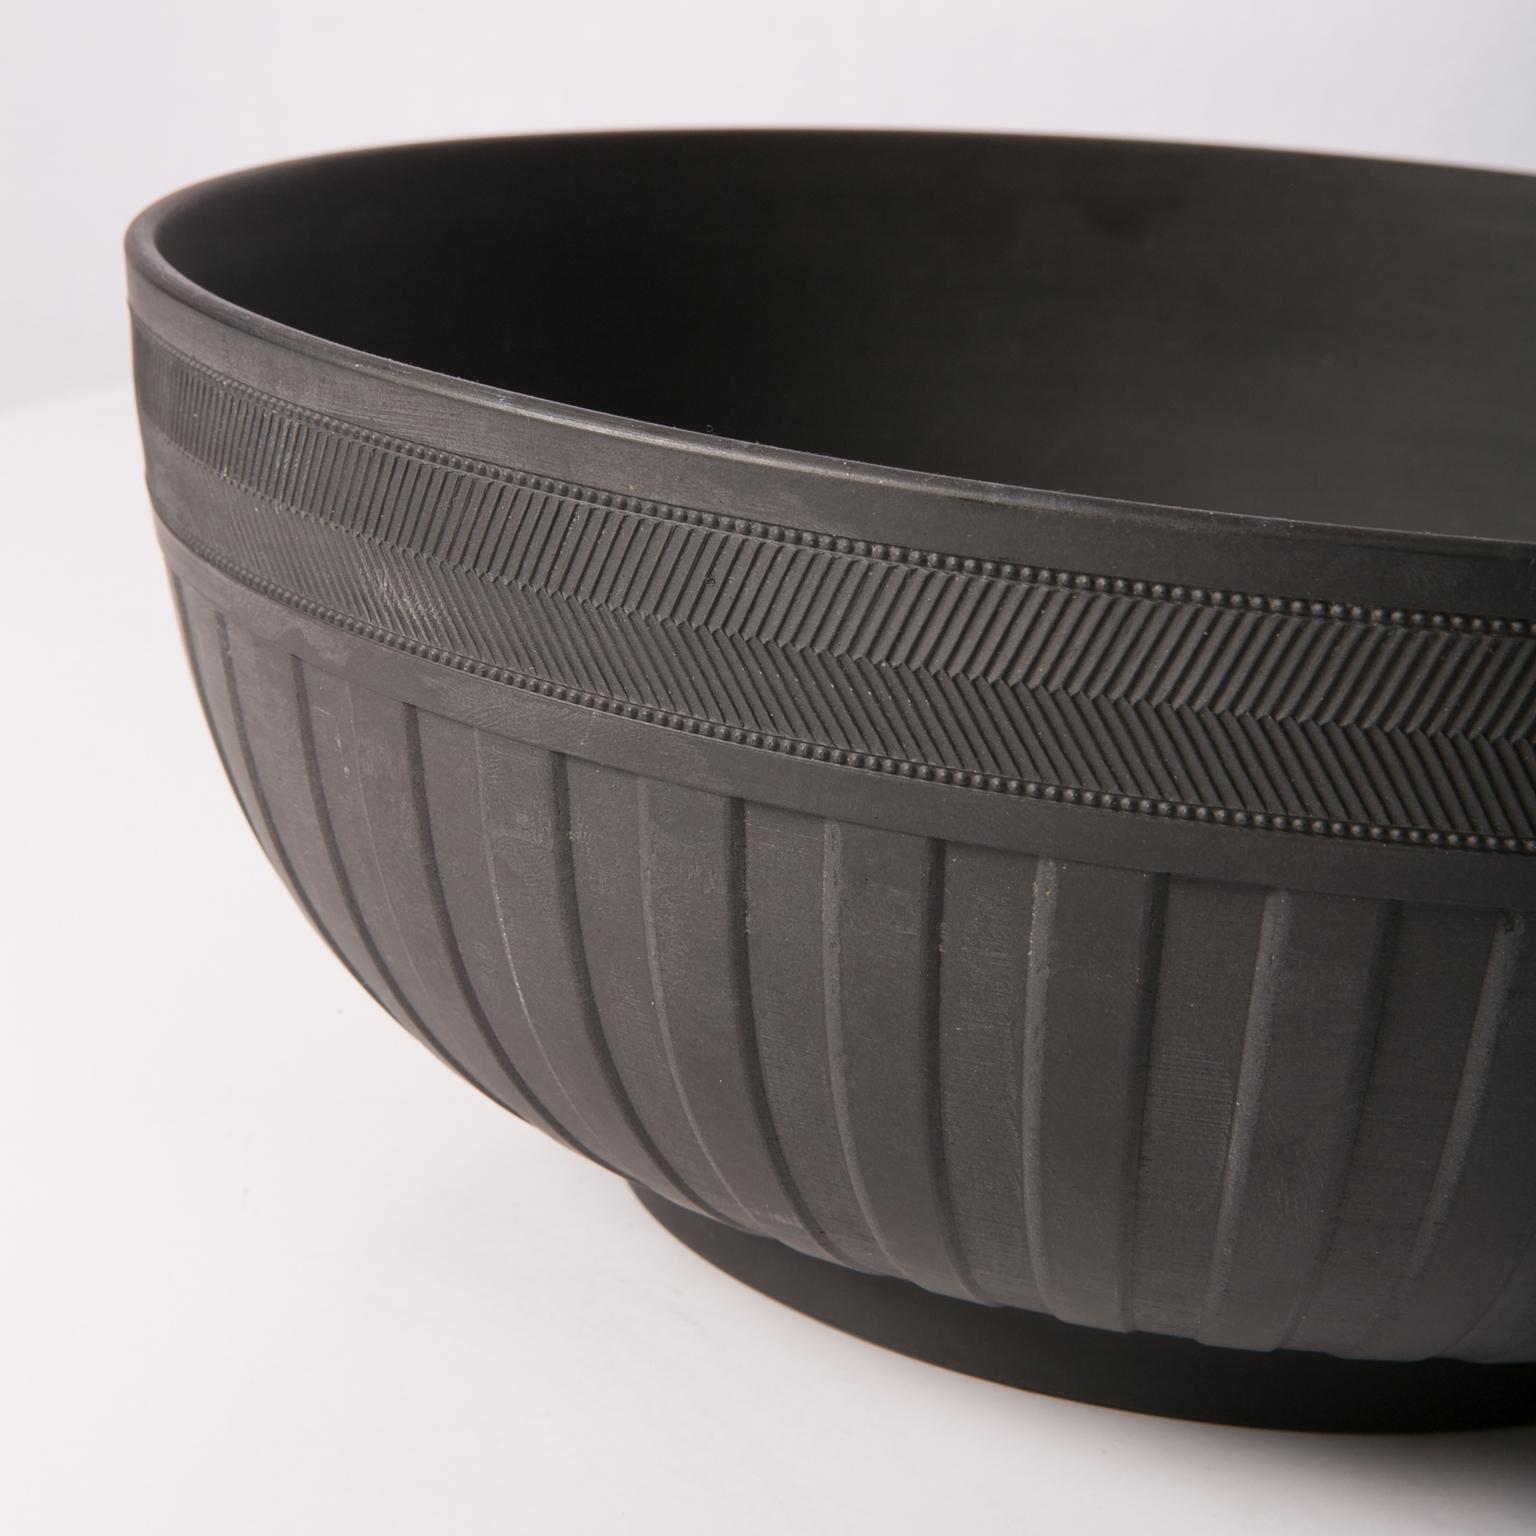 A large wedgwood black basalt engine turned bowl decorated around the outside with a simple band of chevrons at the top, and a band of wide vertical cuts below that. The vertical cuts are wide and deep enough that you can see the texture of the